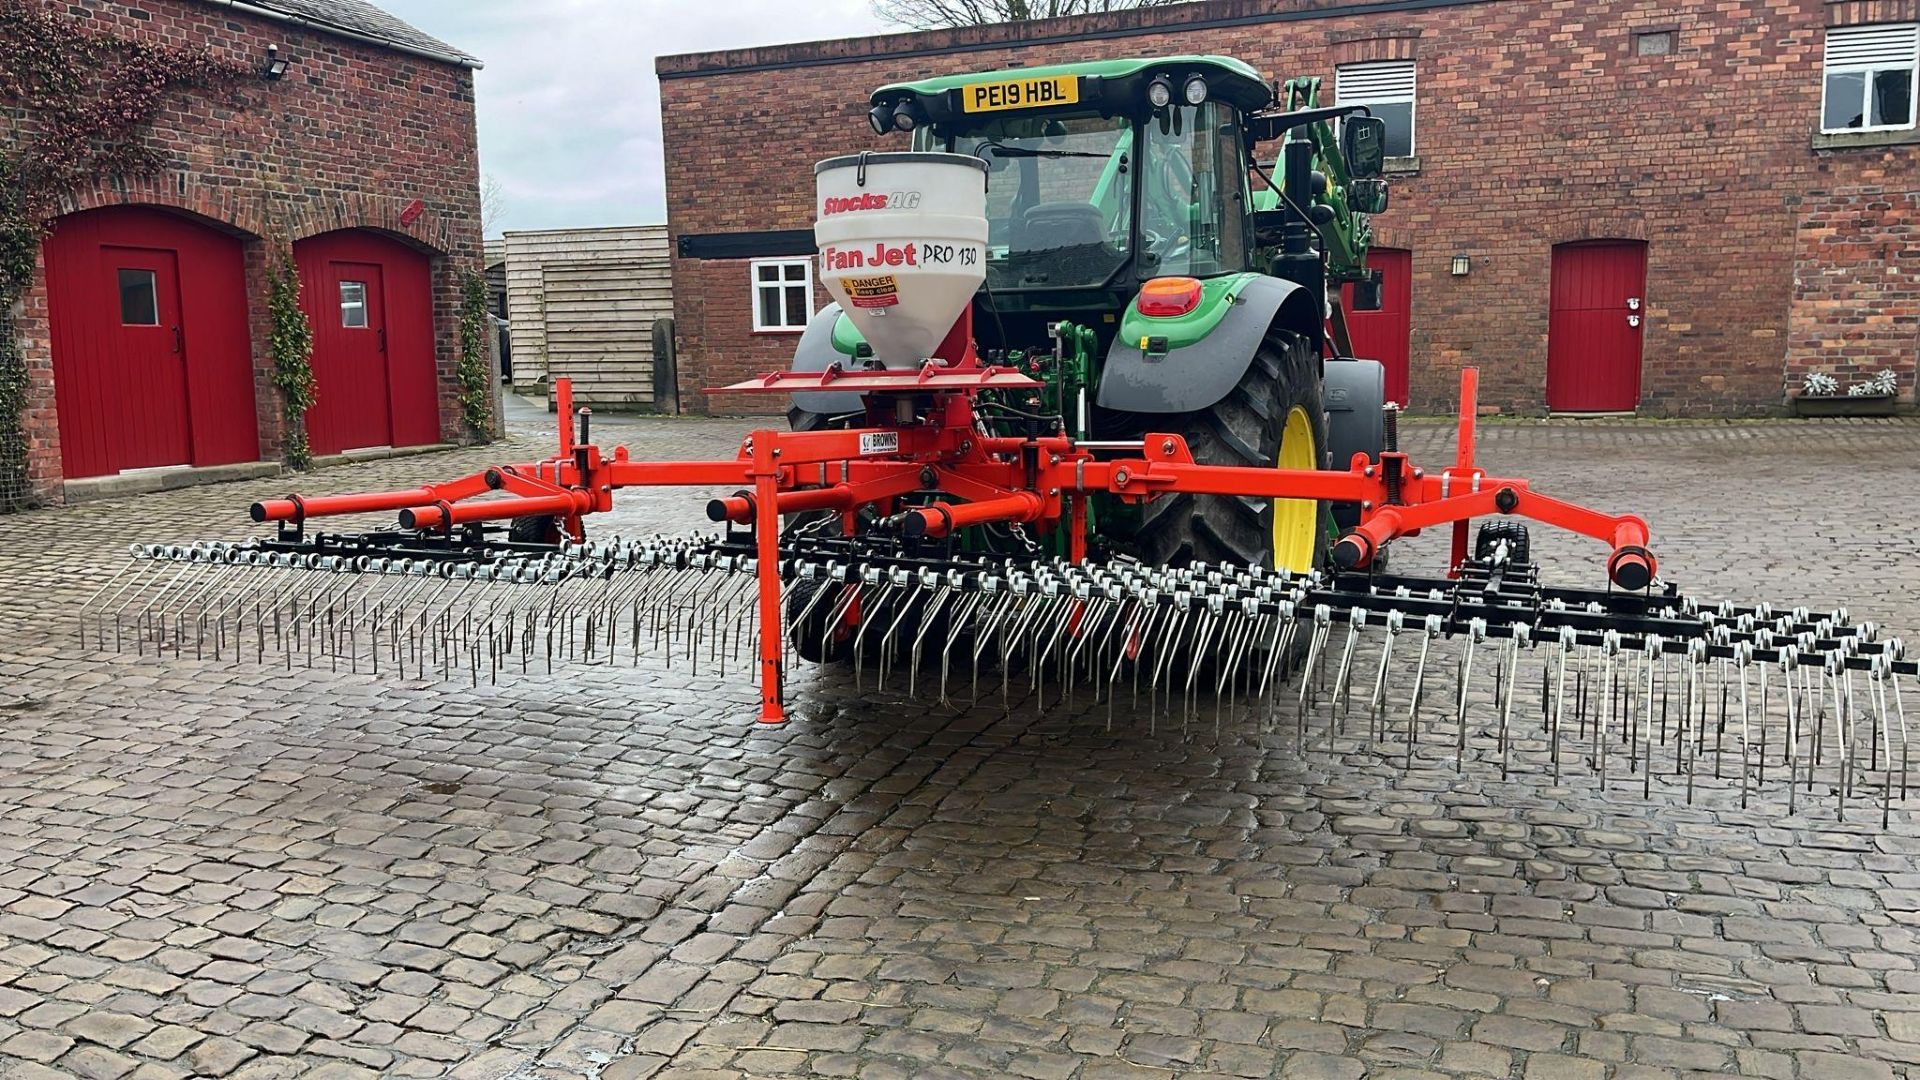 BROWNS GRASSMASTER SPRING TINE GRASS HARROWS WITH STOCKS FAN JET PRO 130 AIR SEEDER SERIAL NUMBER